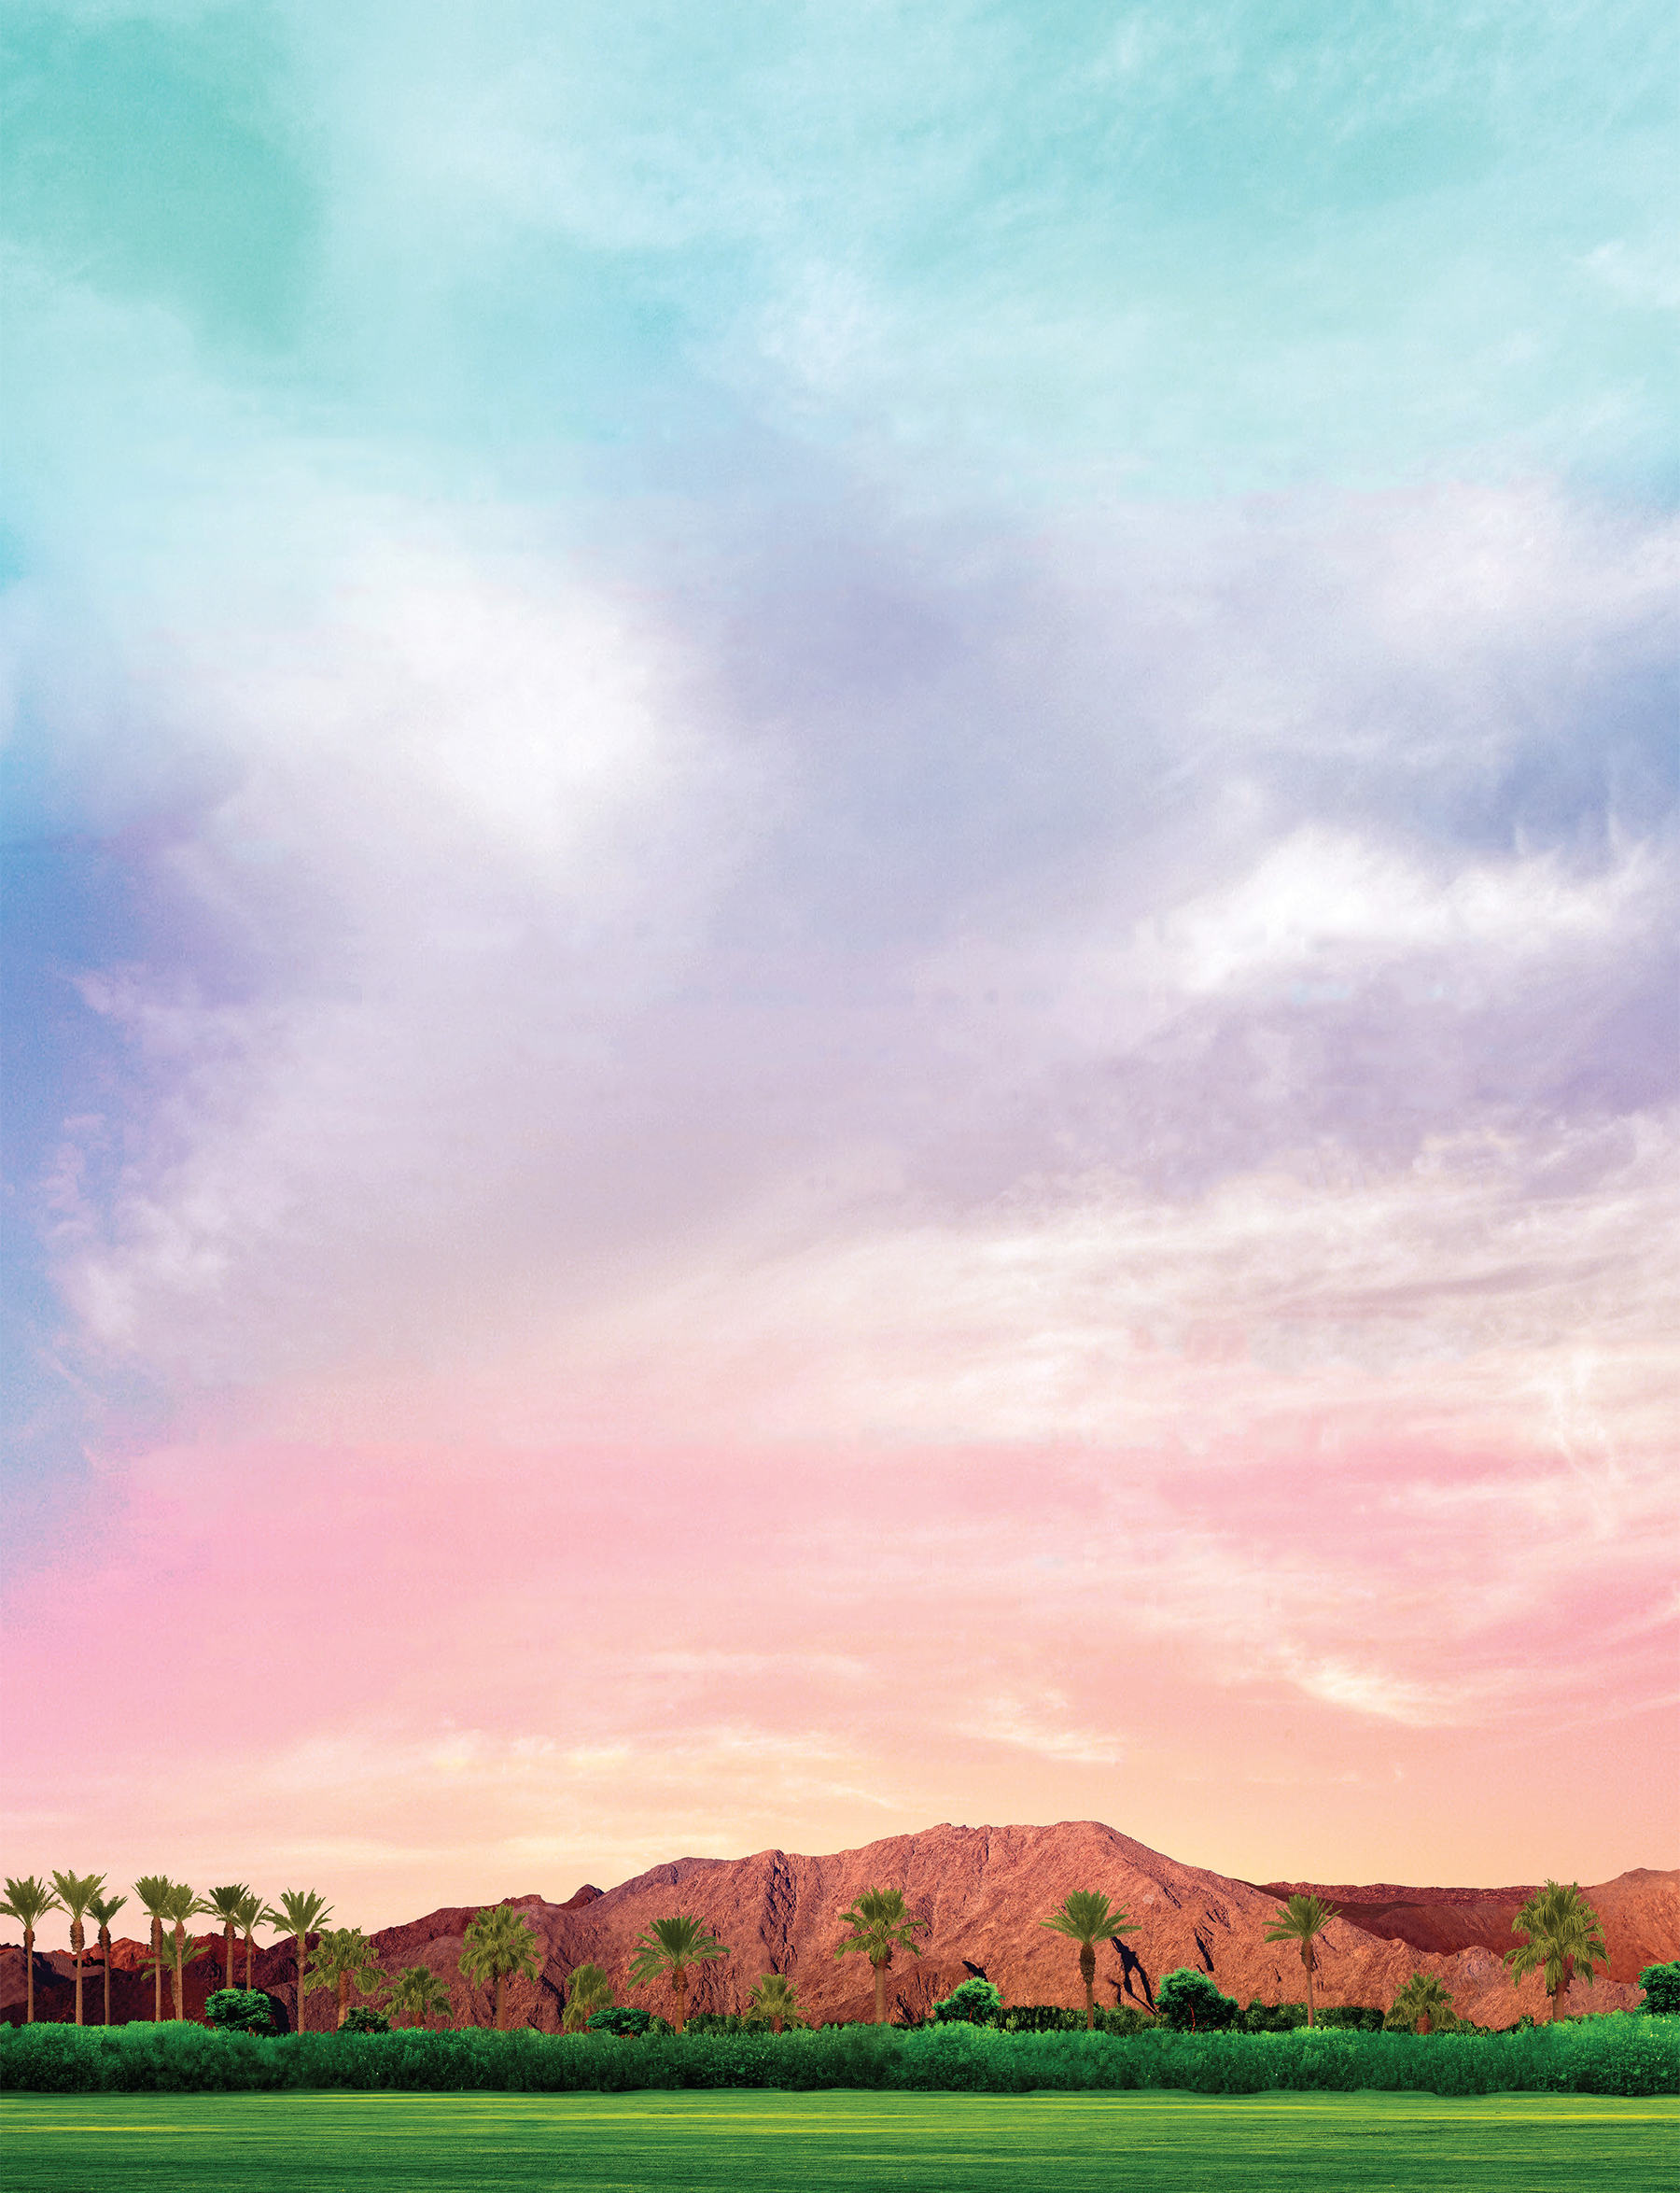 The Blank Coachella Background I Made For My Mix Cover Photo